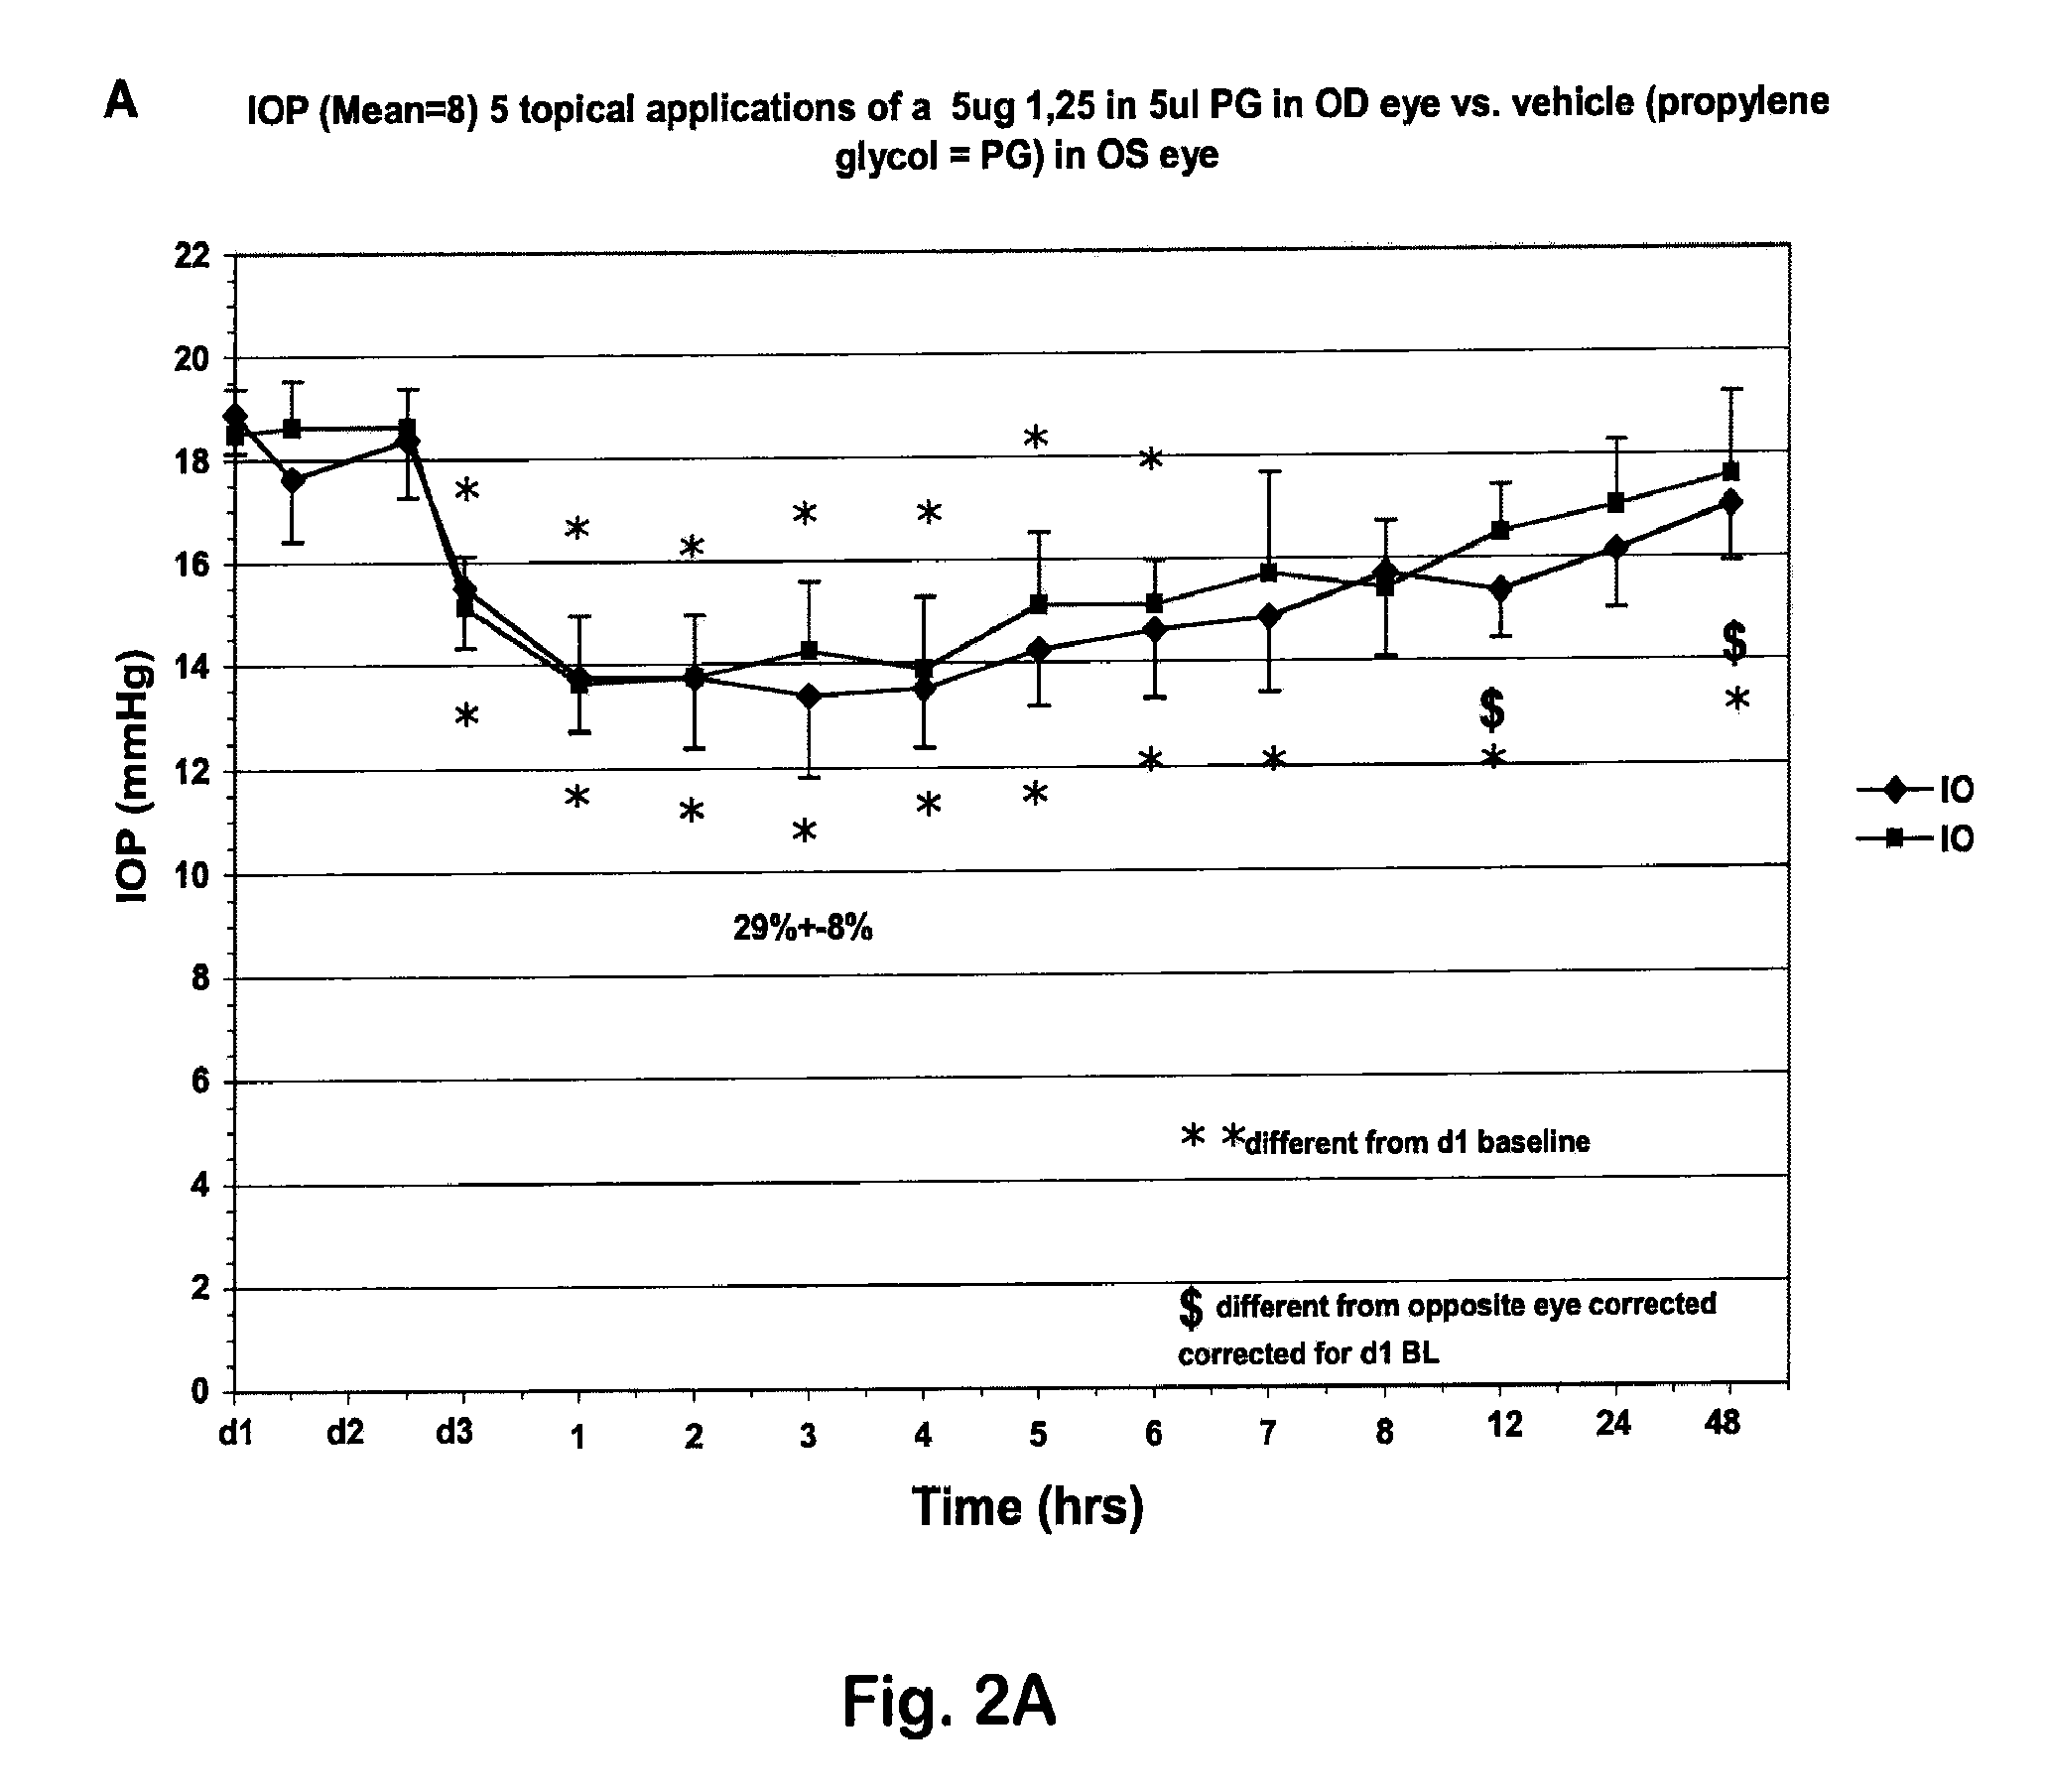 Vitamin D Compounds and Methods for Reducing Ocular Hypertension (OHT)